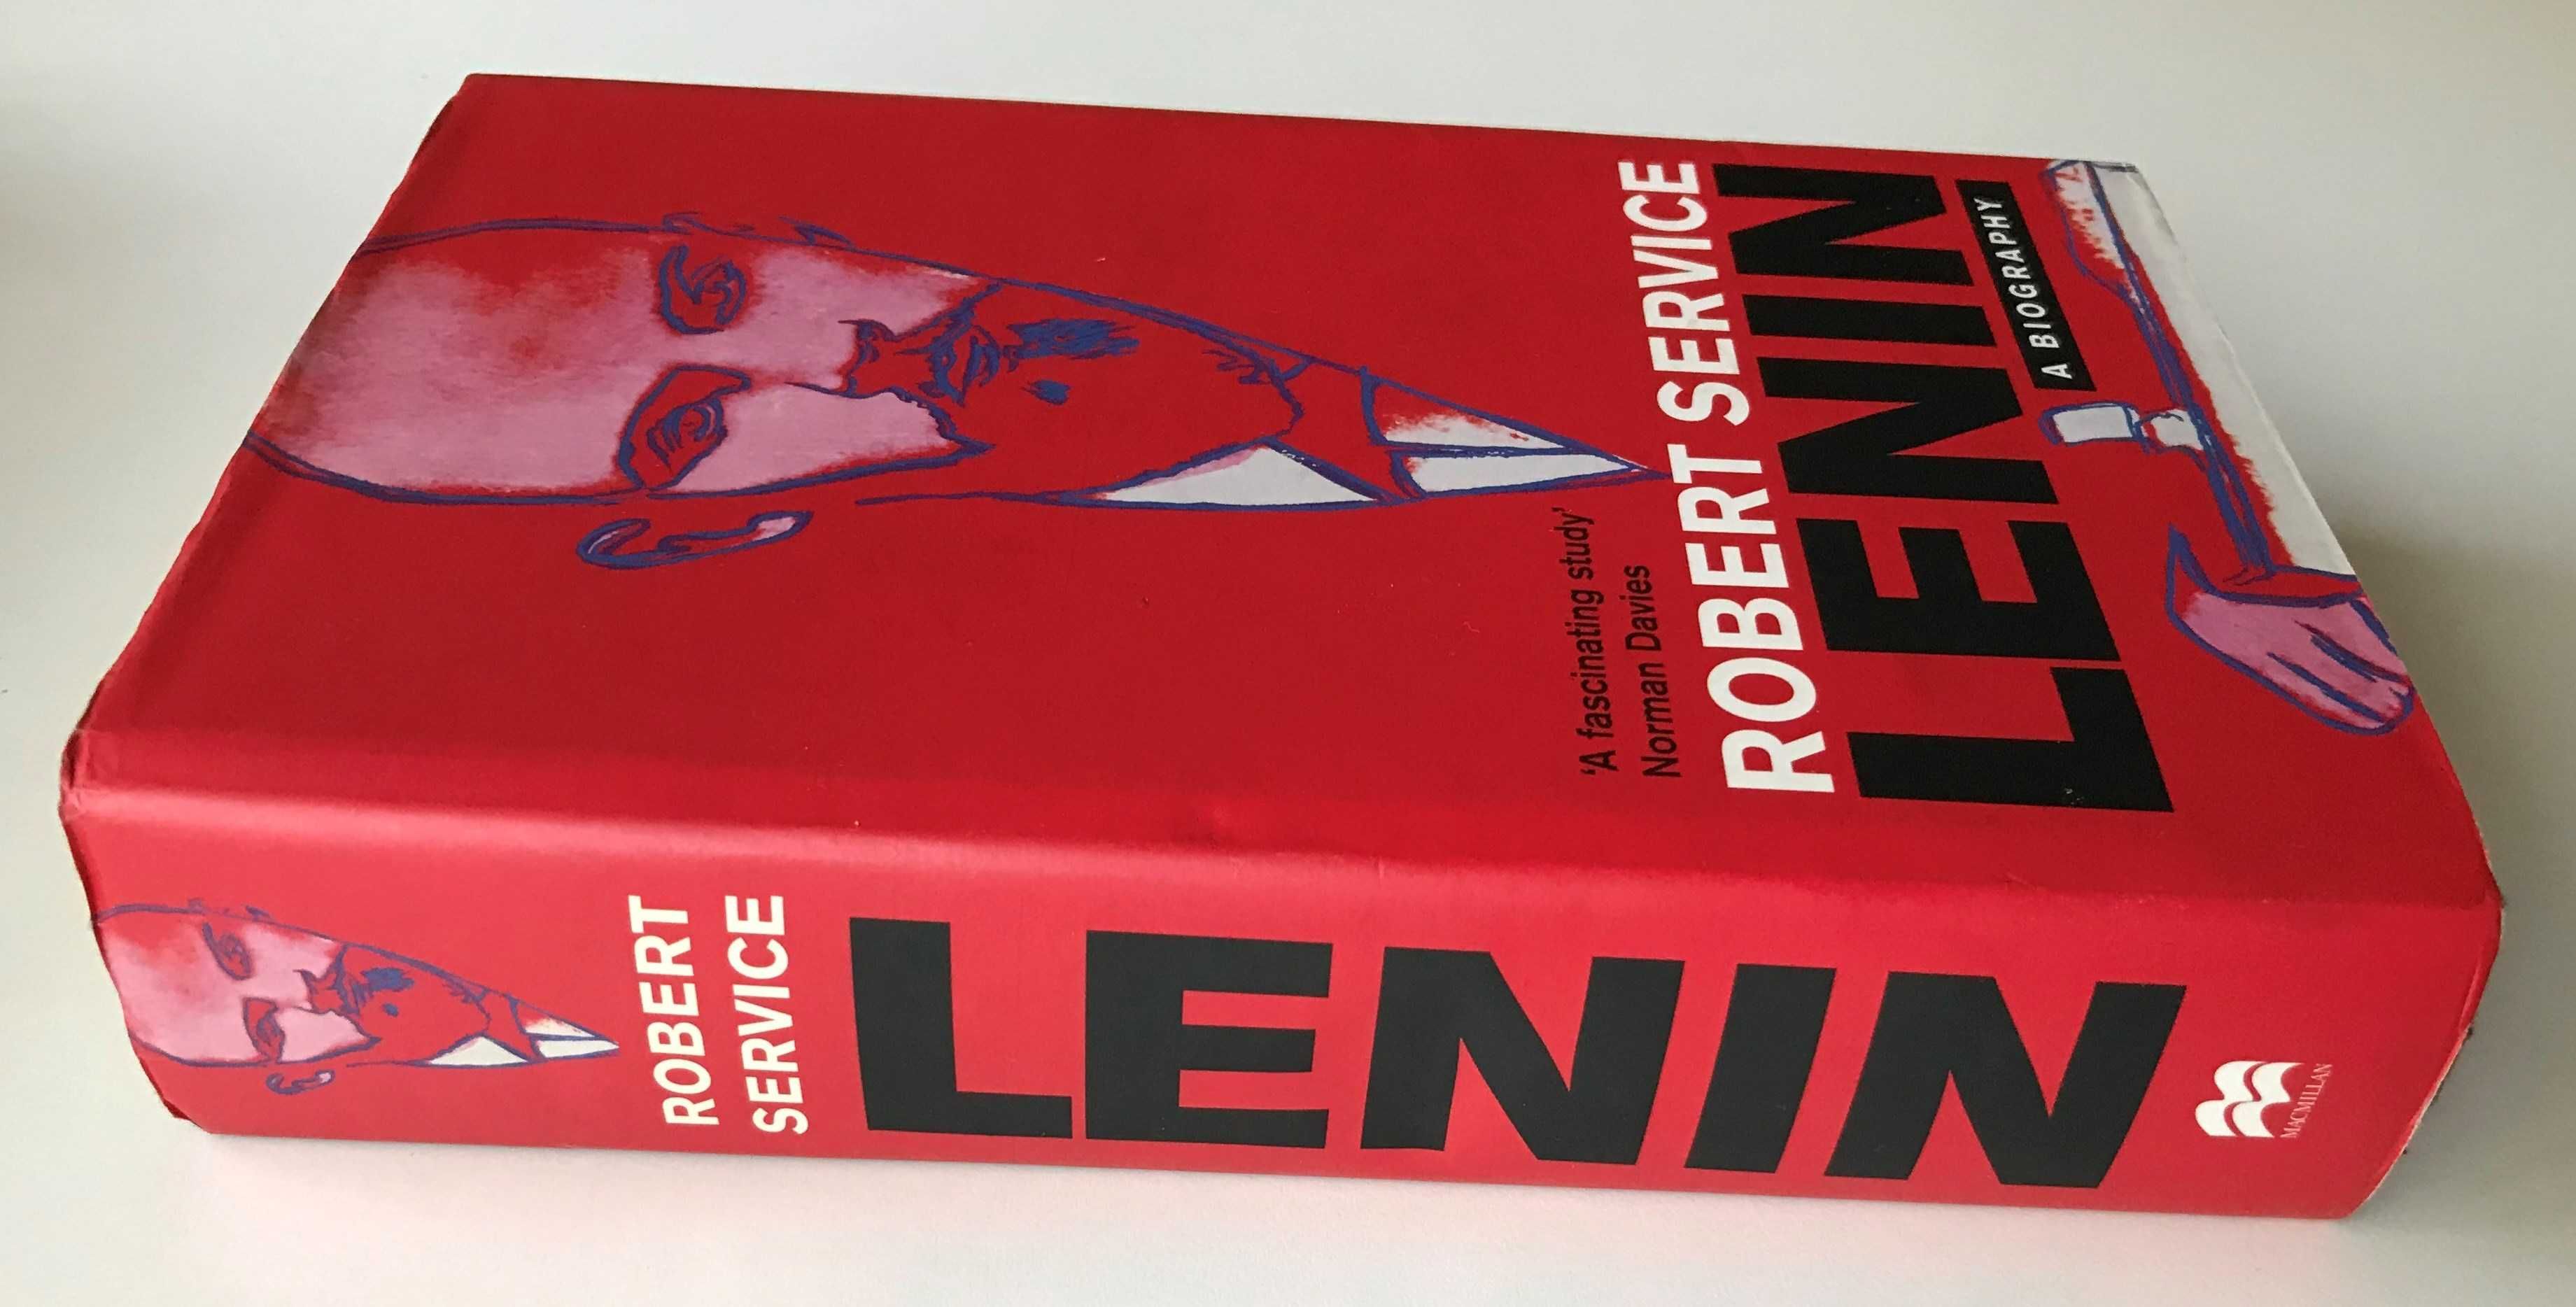 "Lenin A Biography" by Robert Service/ Hardcover 2000/ ENGLISH/ as NEW